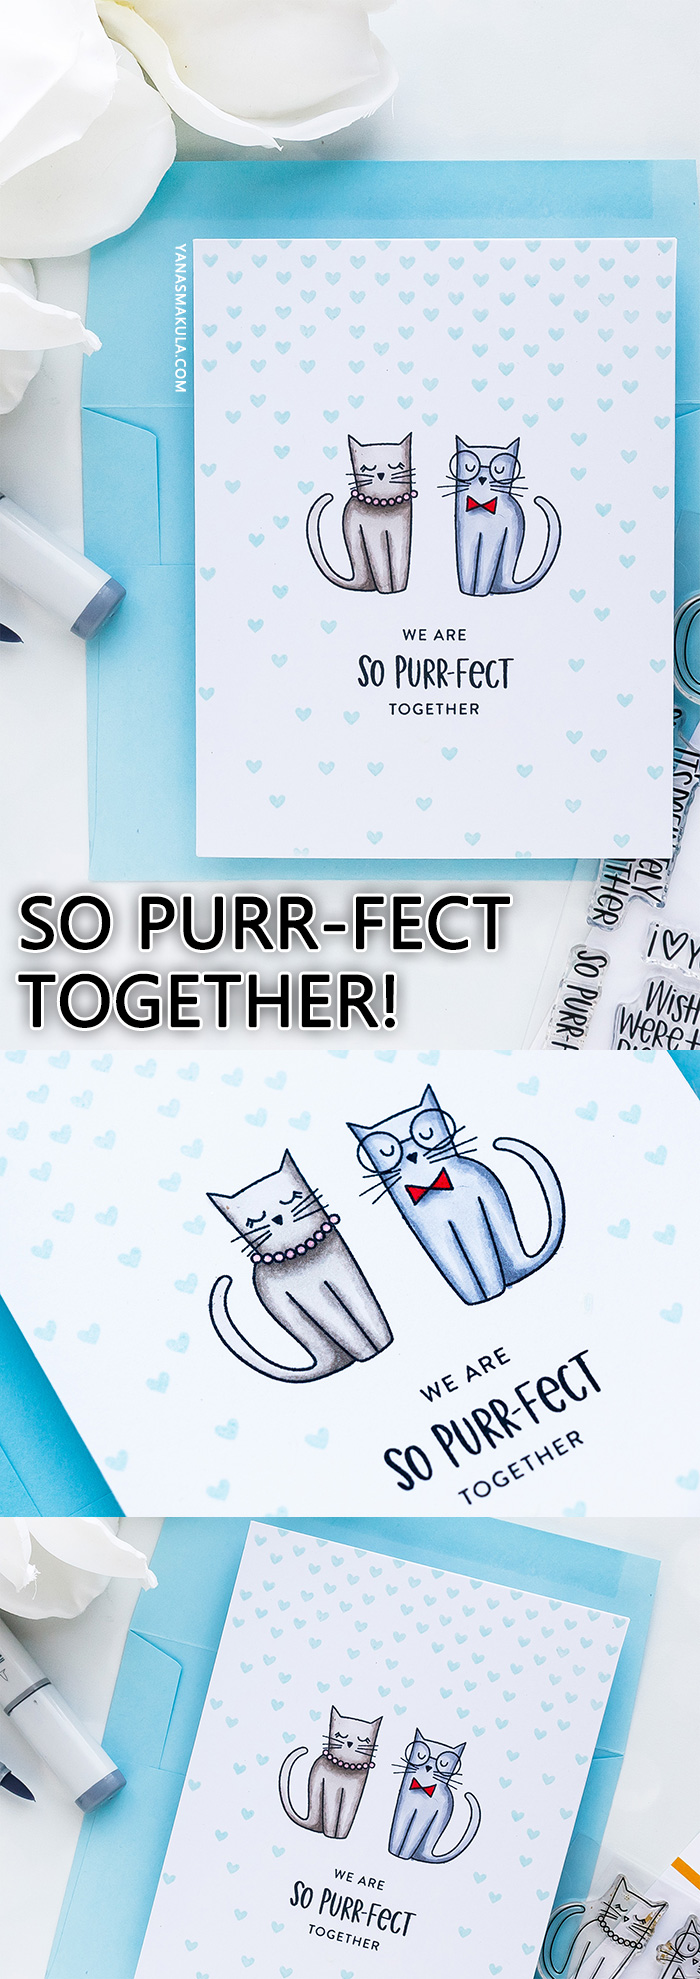 STAMPtember 2018 | We Are So Purr-Fect Together Card by Yana Smakula using Right Meow stamp set by Simon Says Stamp #yscardmaking #onelayercard #catcard #catlove #catitude